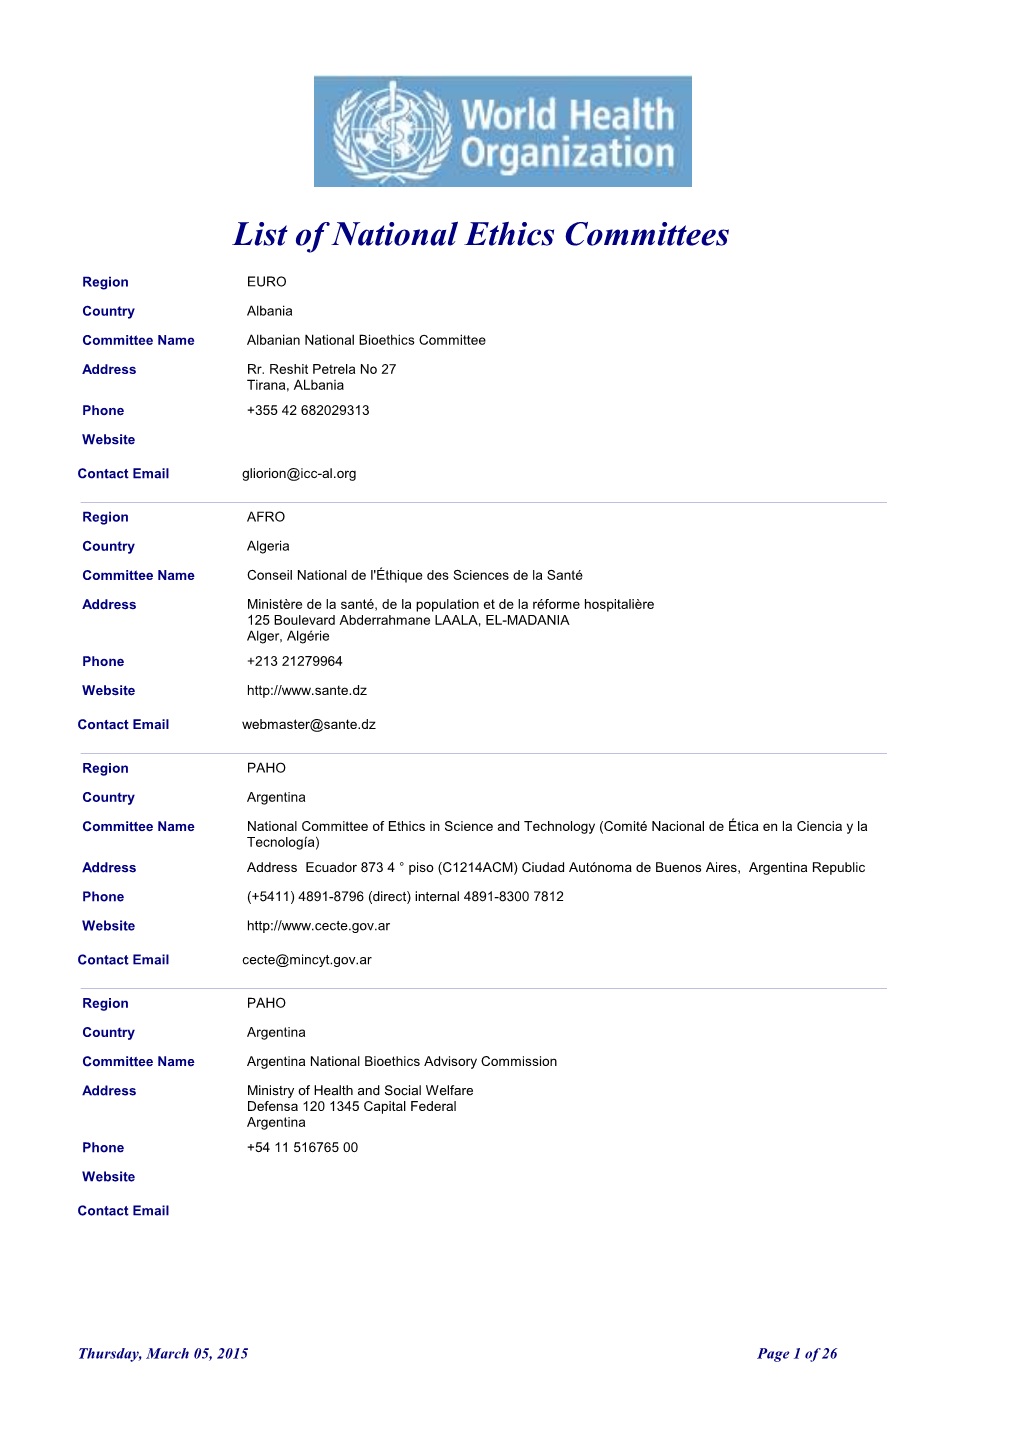 List of National Ethics Committees